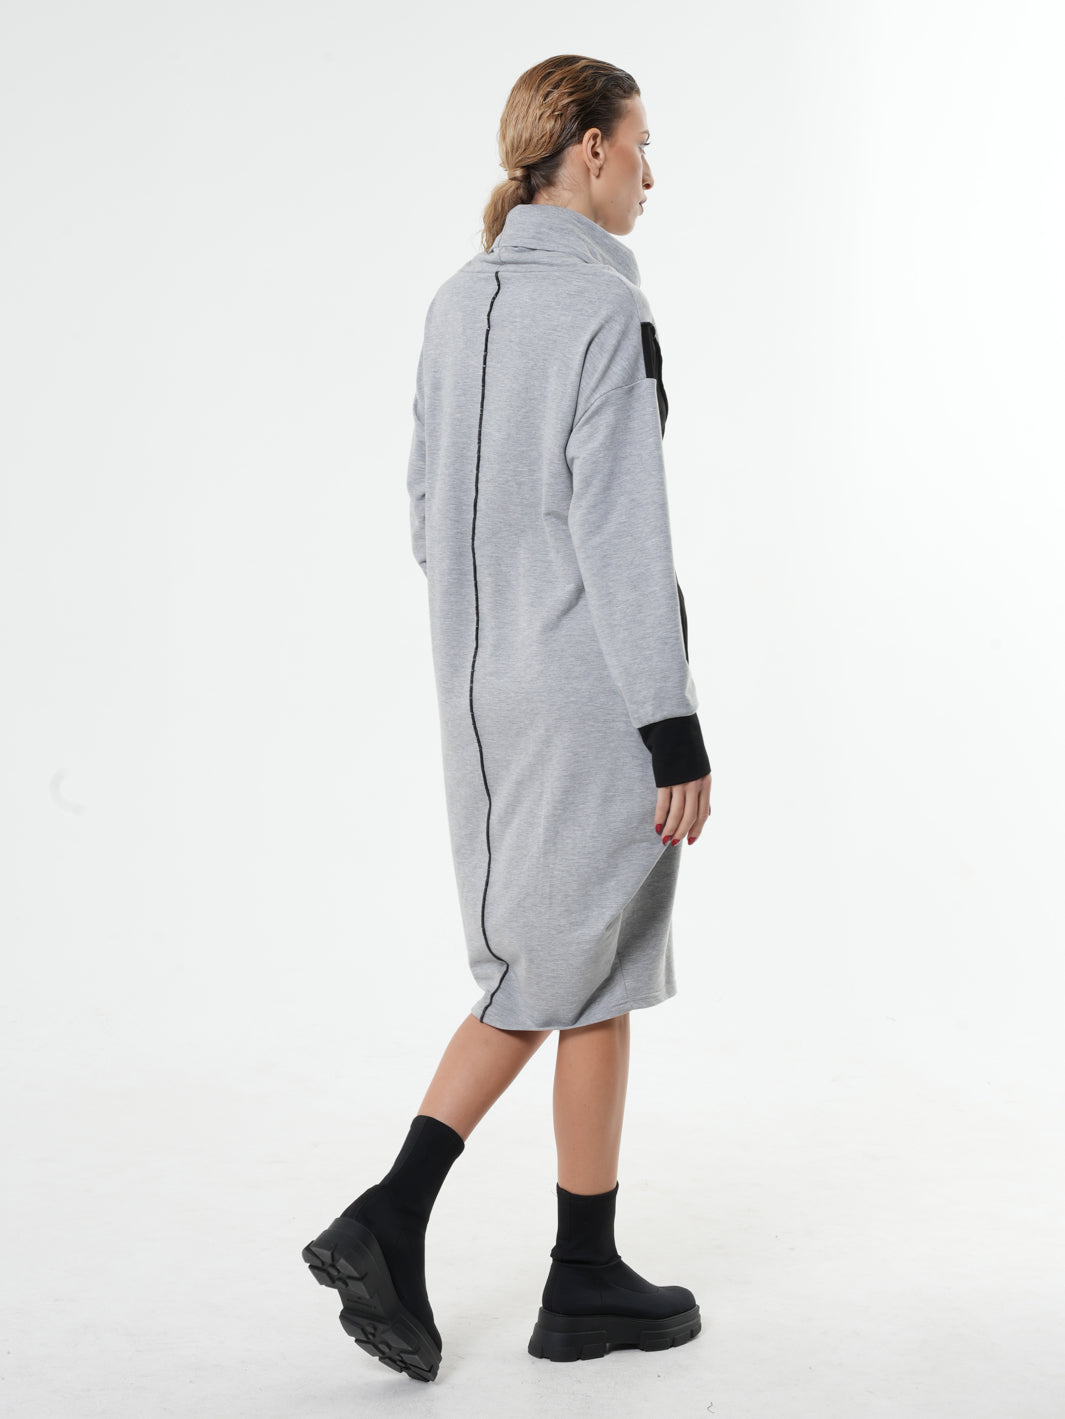 Long Sleeve Cotton Dress With Turtleneck In Gray